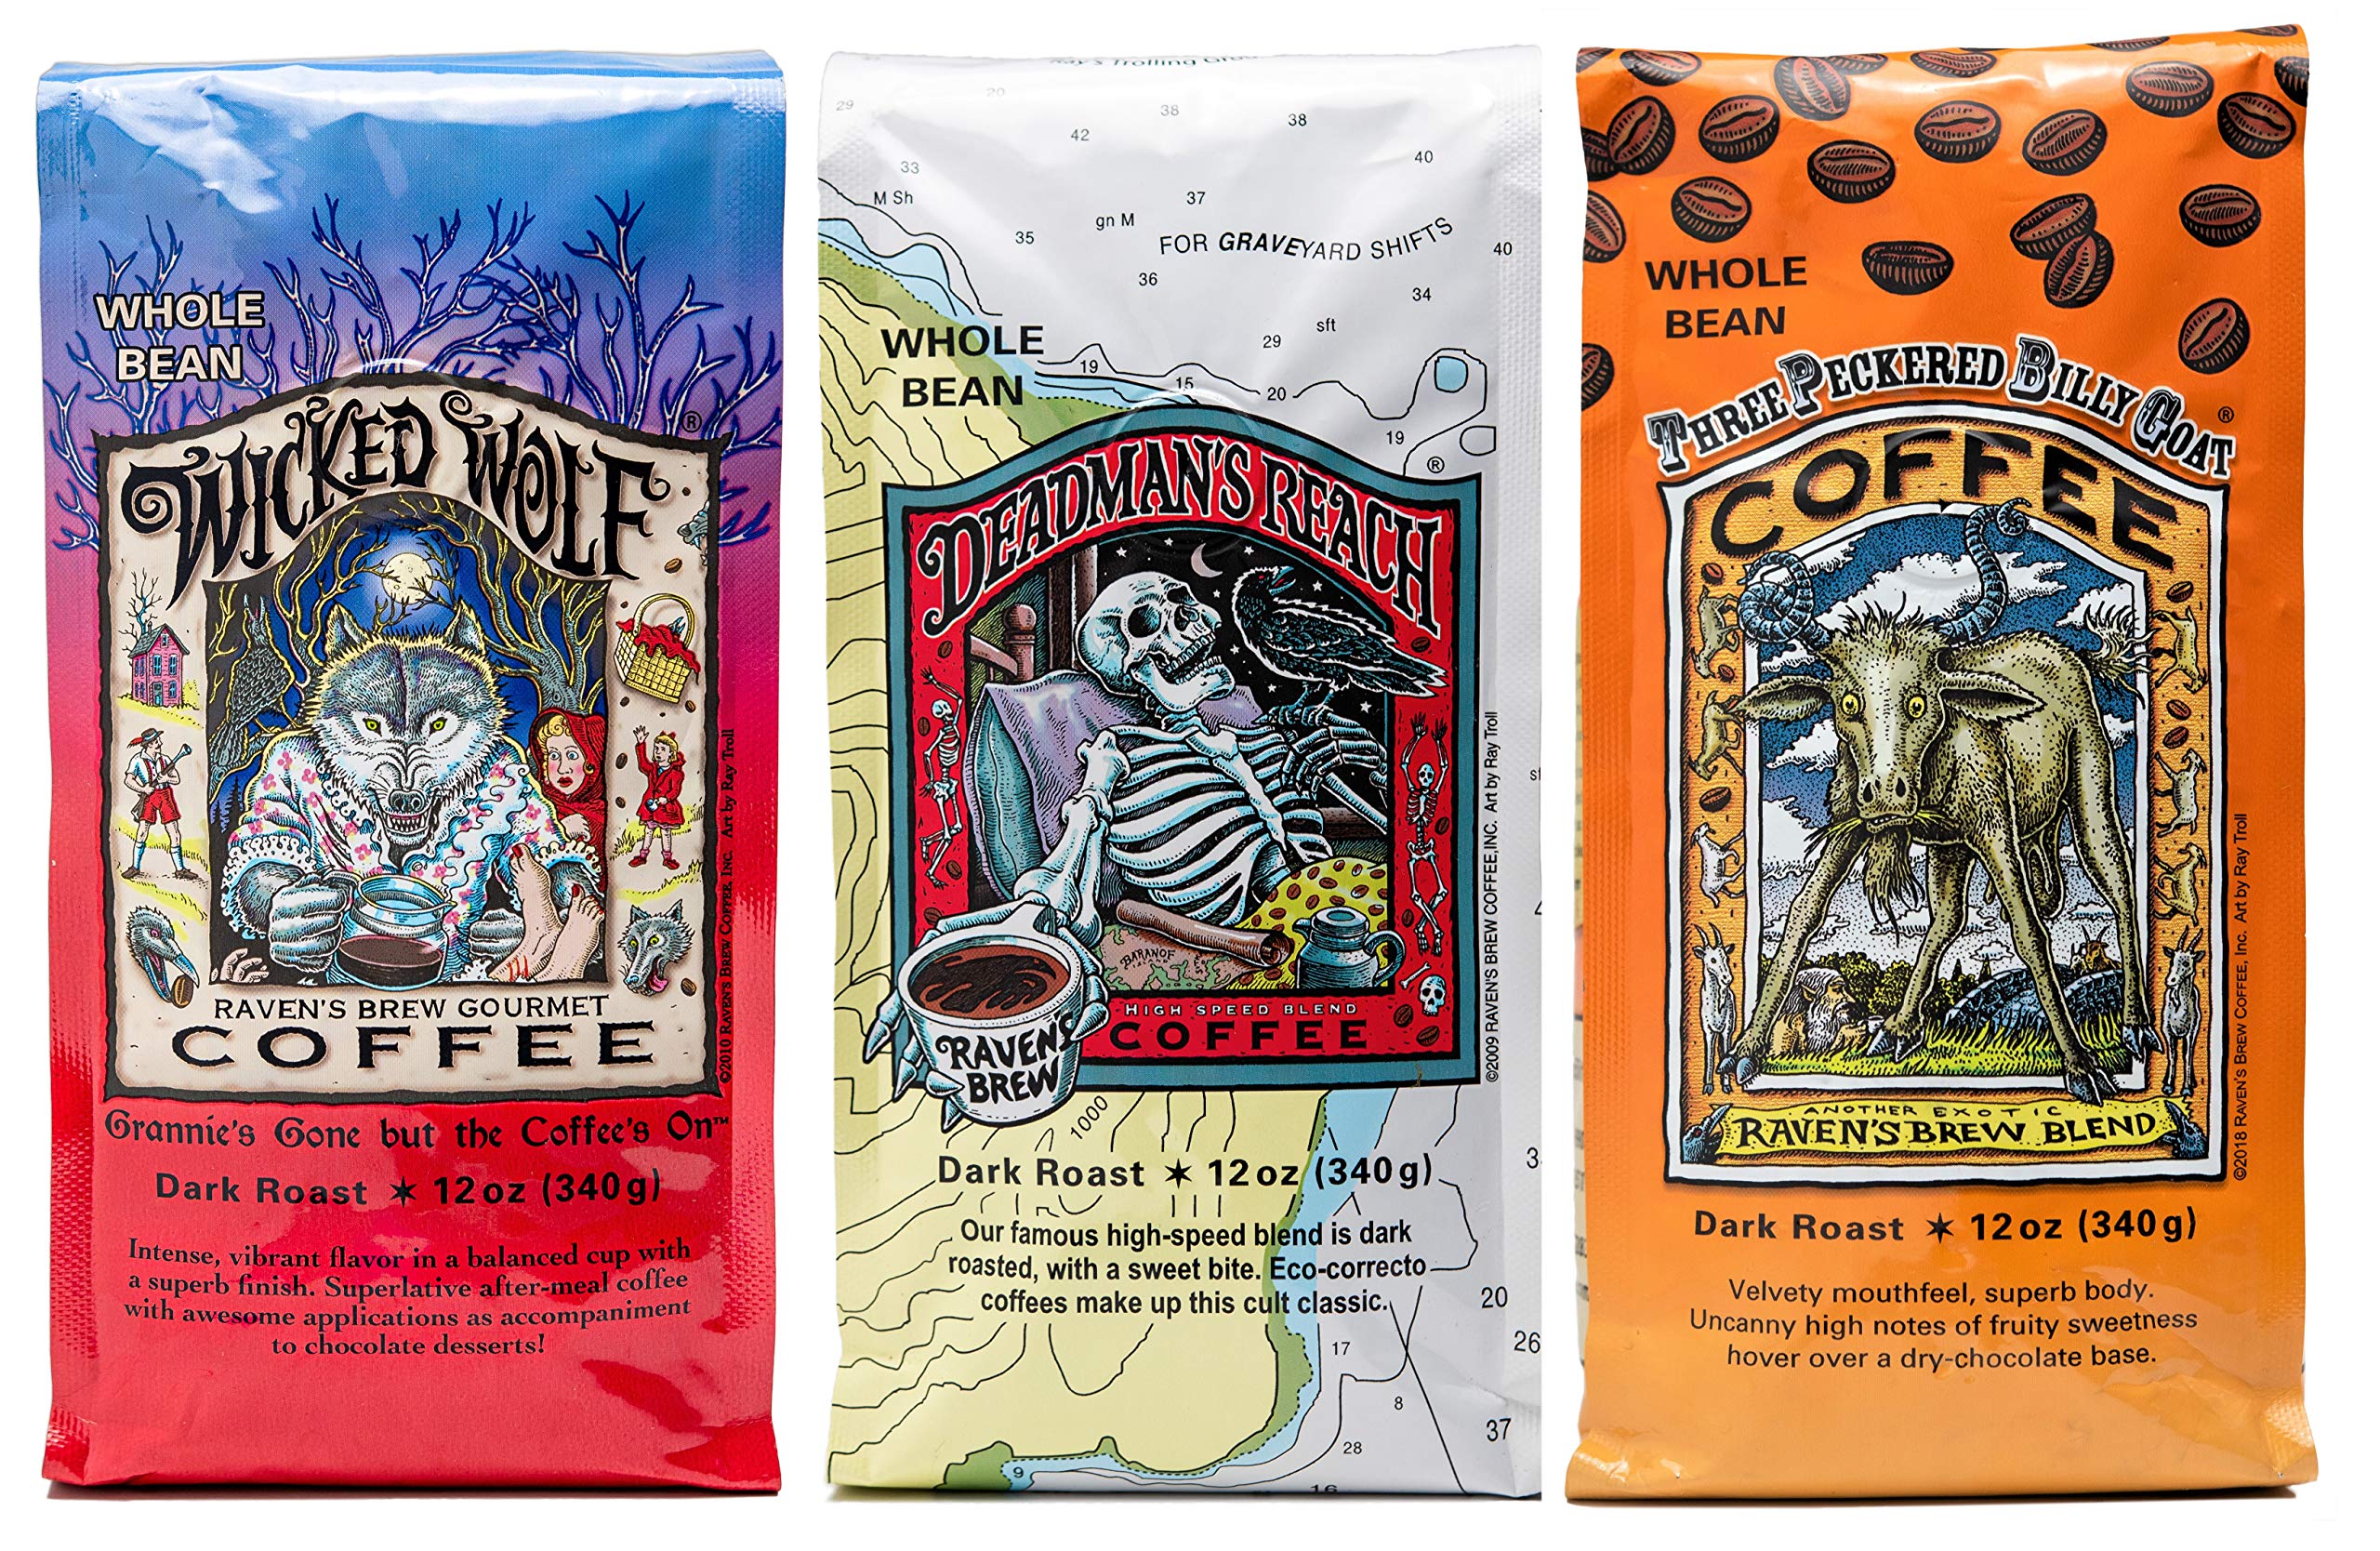 Raven's Brew Whole Bean Coffee Variety Pack - 3 Delicious Flavors - Wicked Wolf, Three Peckered Billy Goat and Deadman's Reach - 12 oz each